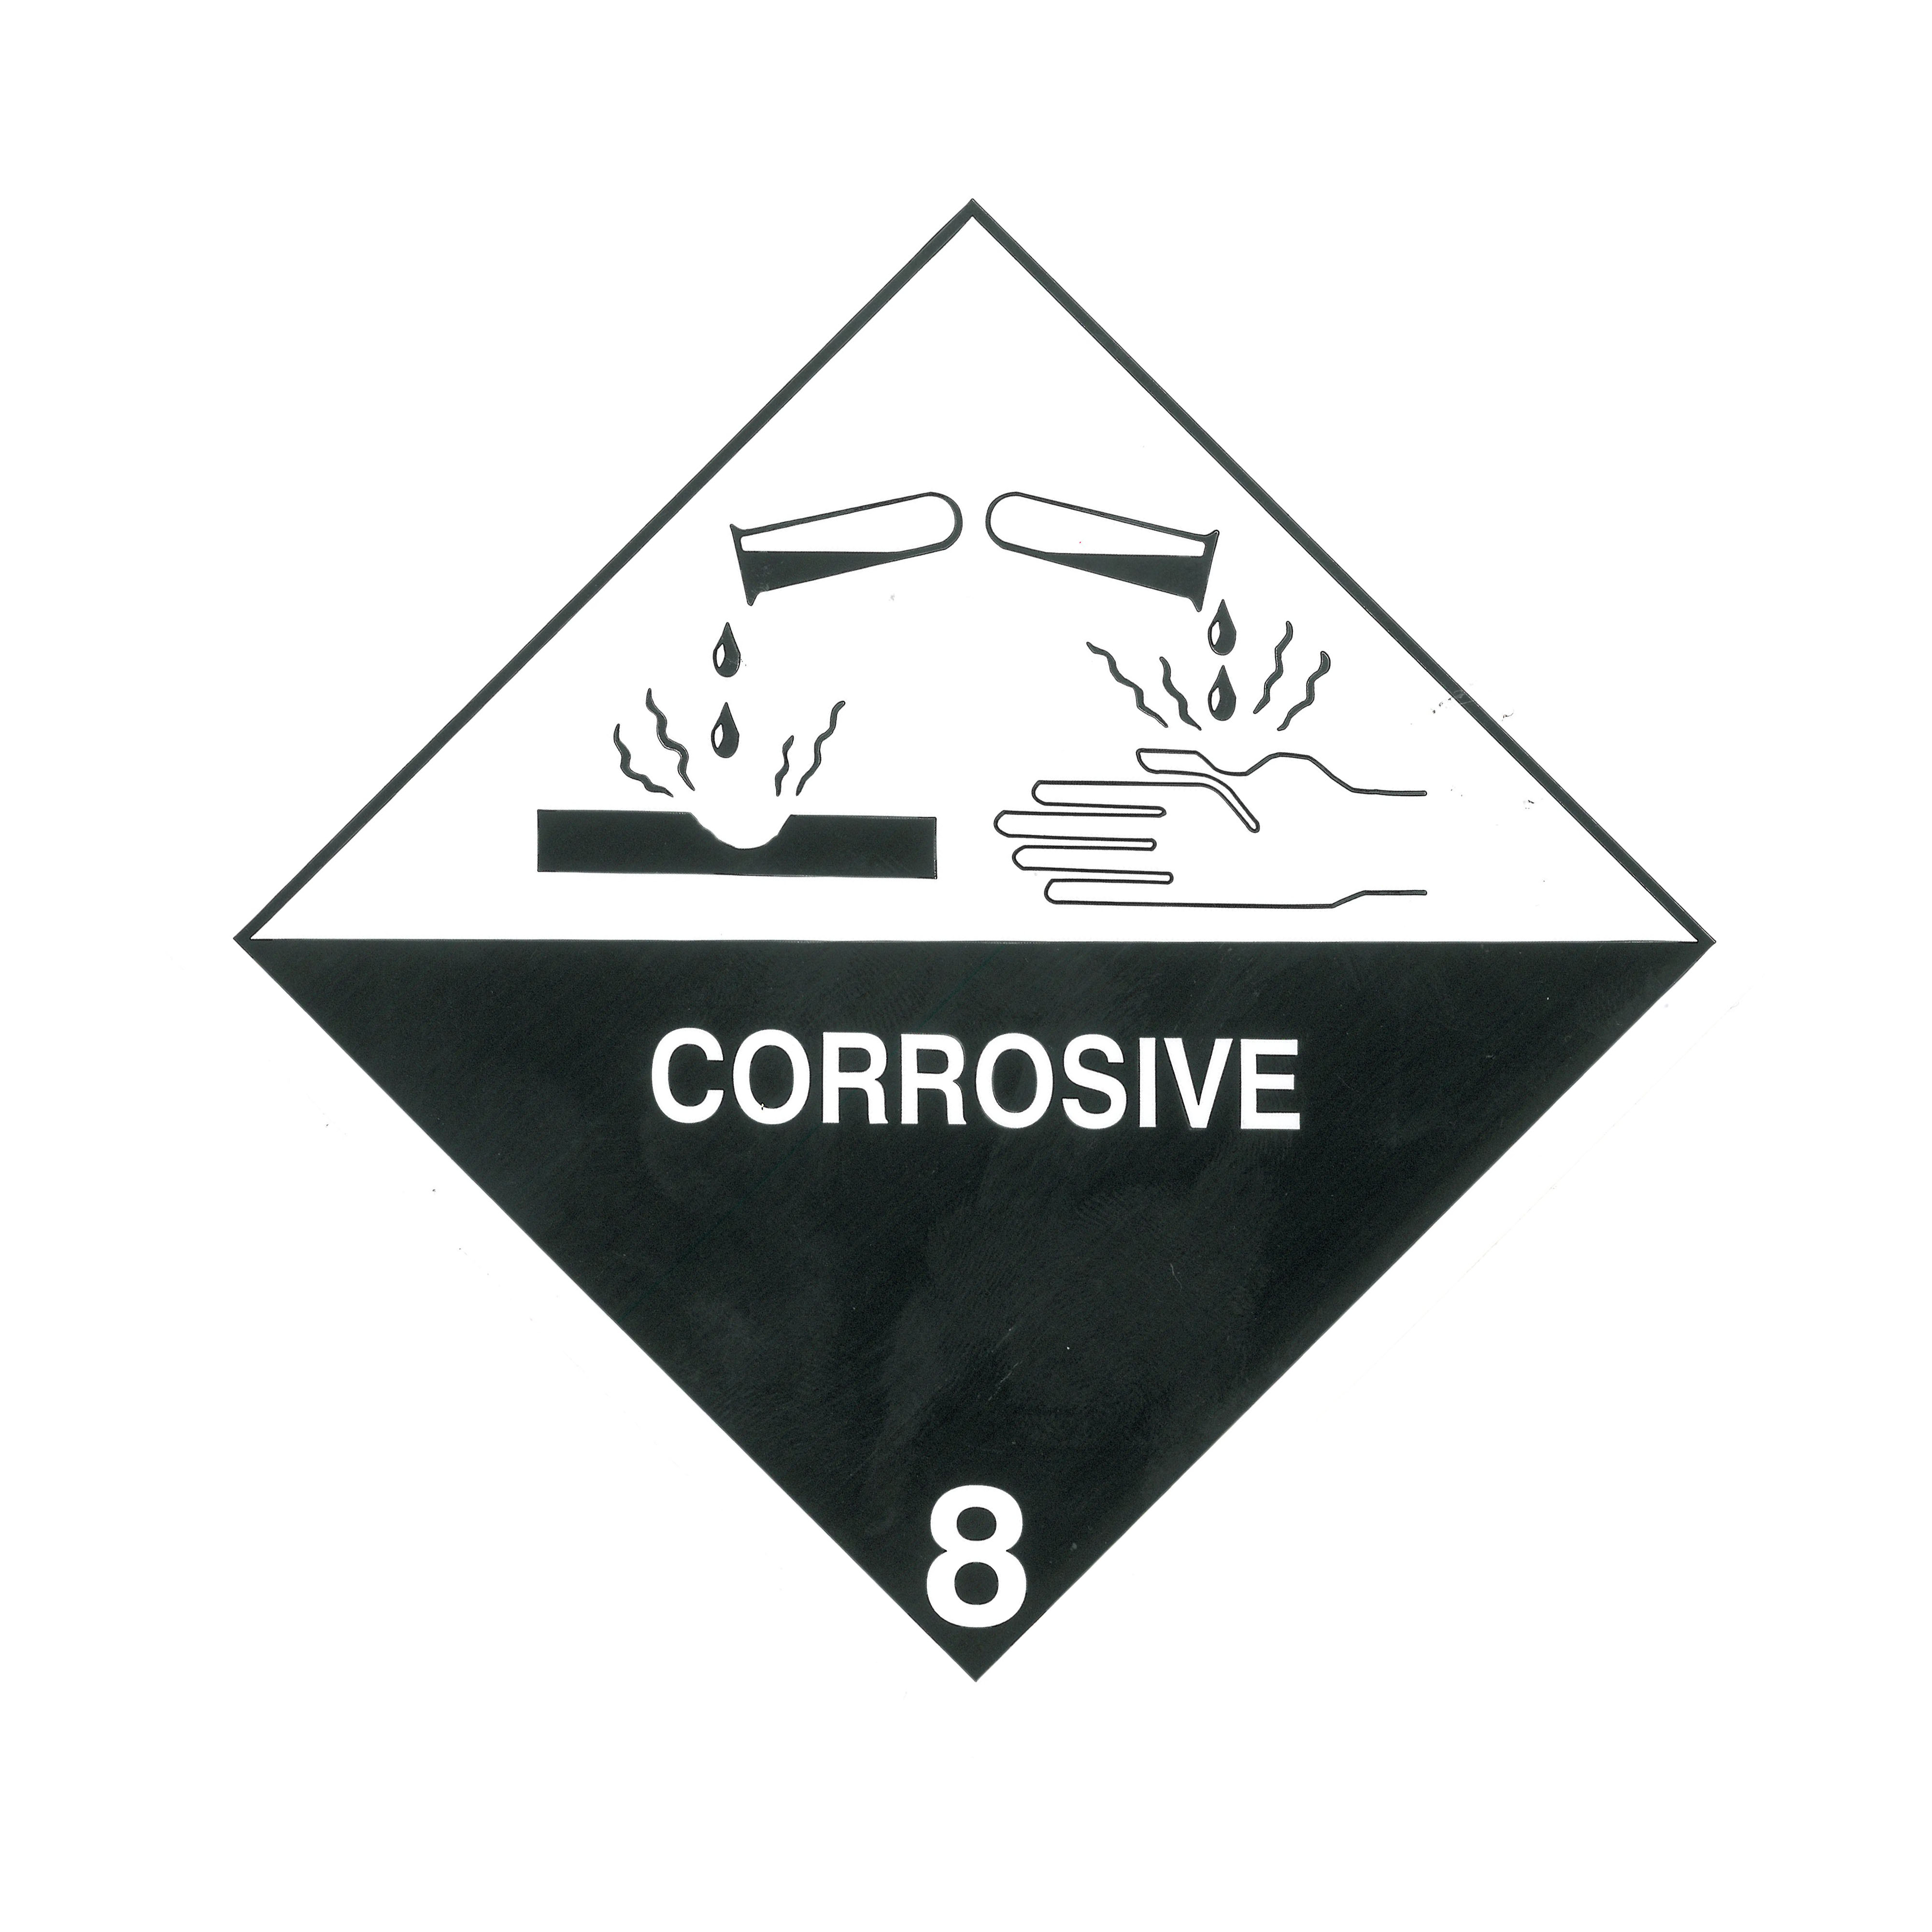 Class Corrosive Hazard Labels Mm X Mm Air Sea Containers